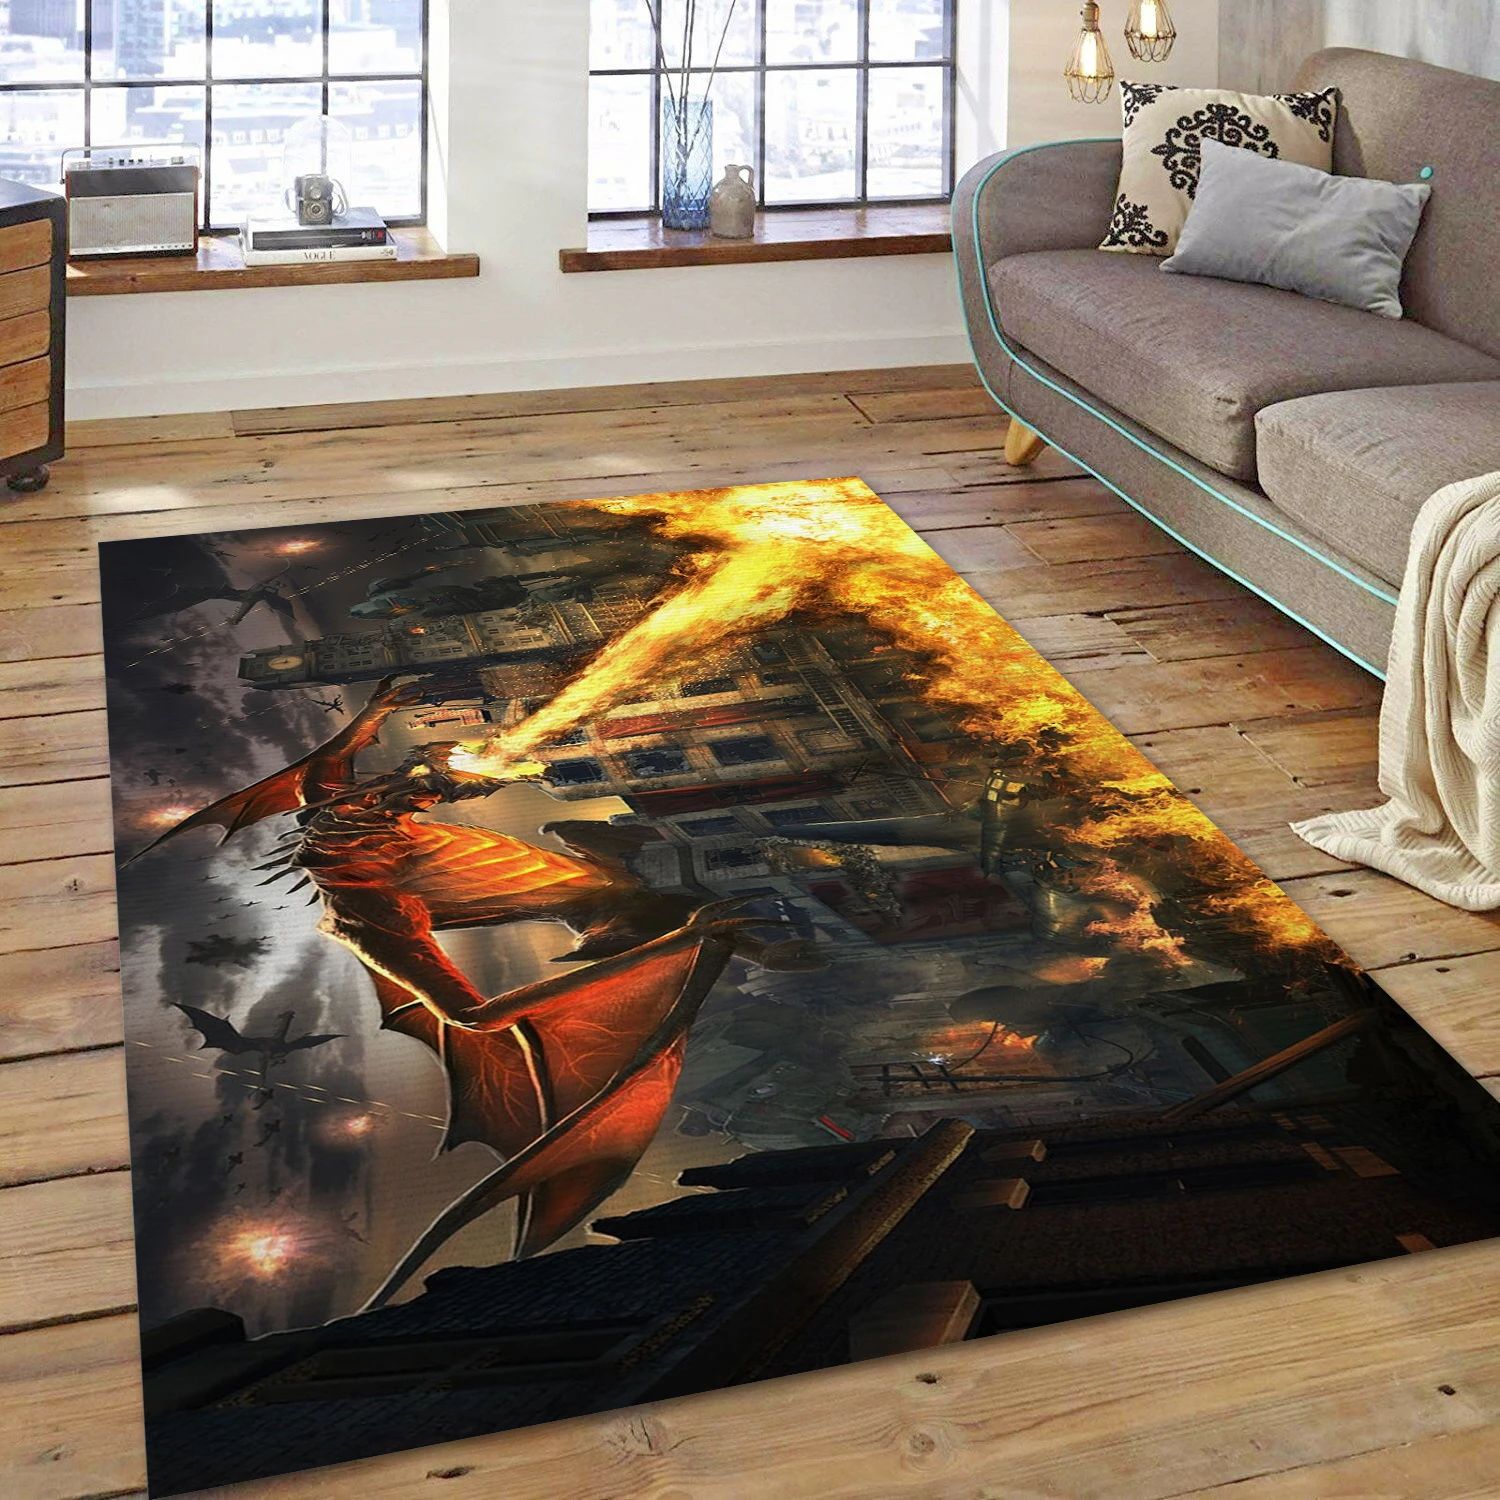 Call Of Duty Black Ops Iii Video Game Area Rug For Christmas, Living Room Rug - Home Decor Floor Decor - Indoor Outdoor Rugs 3